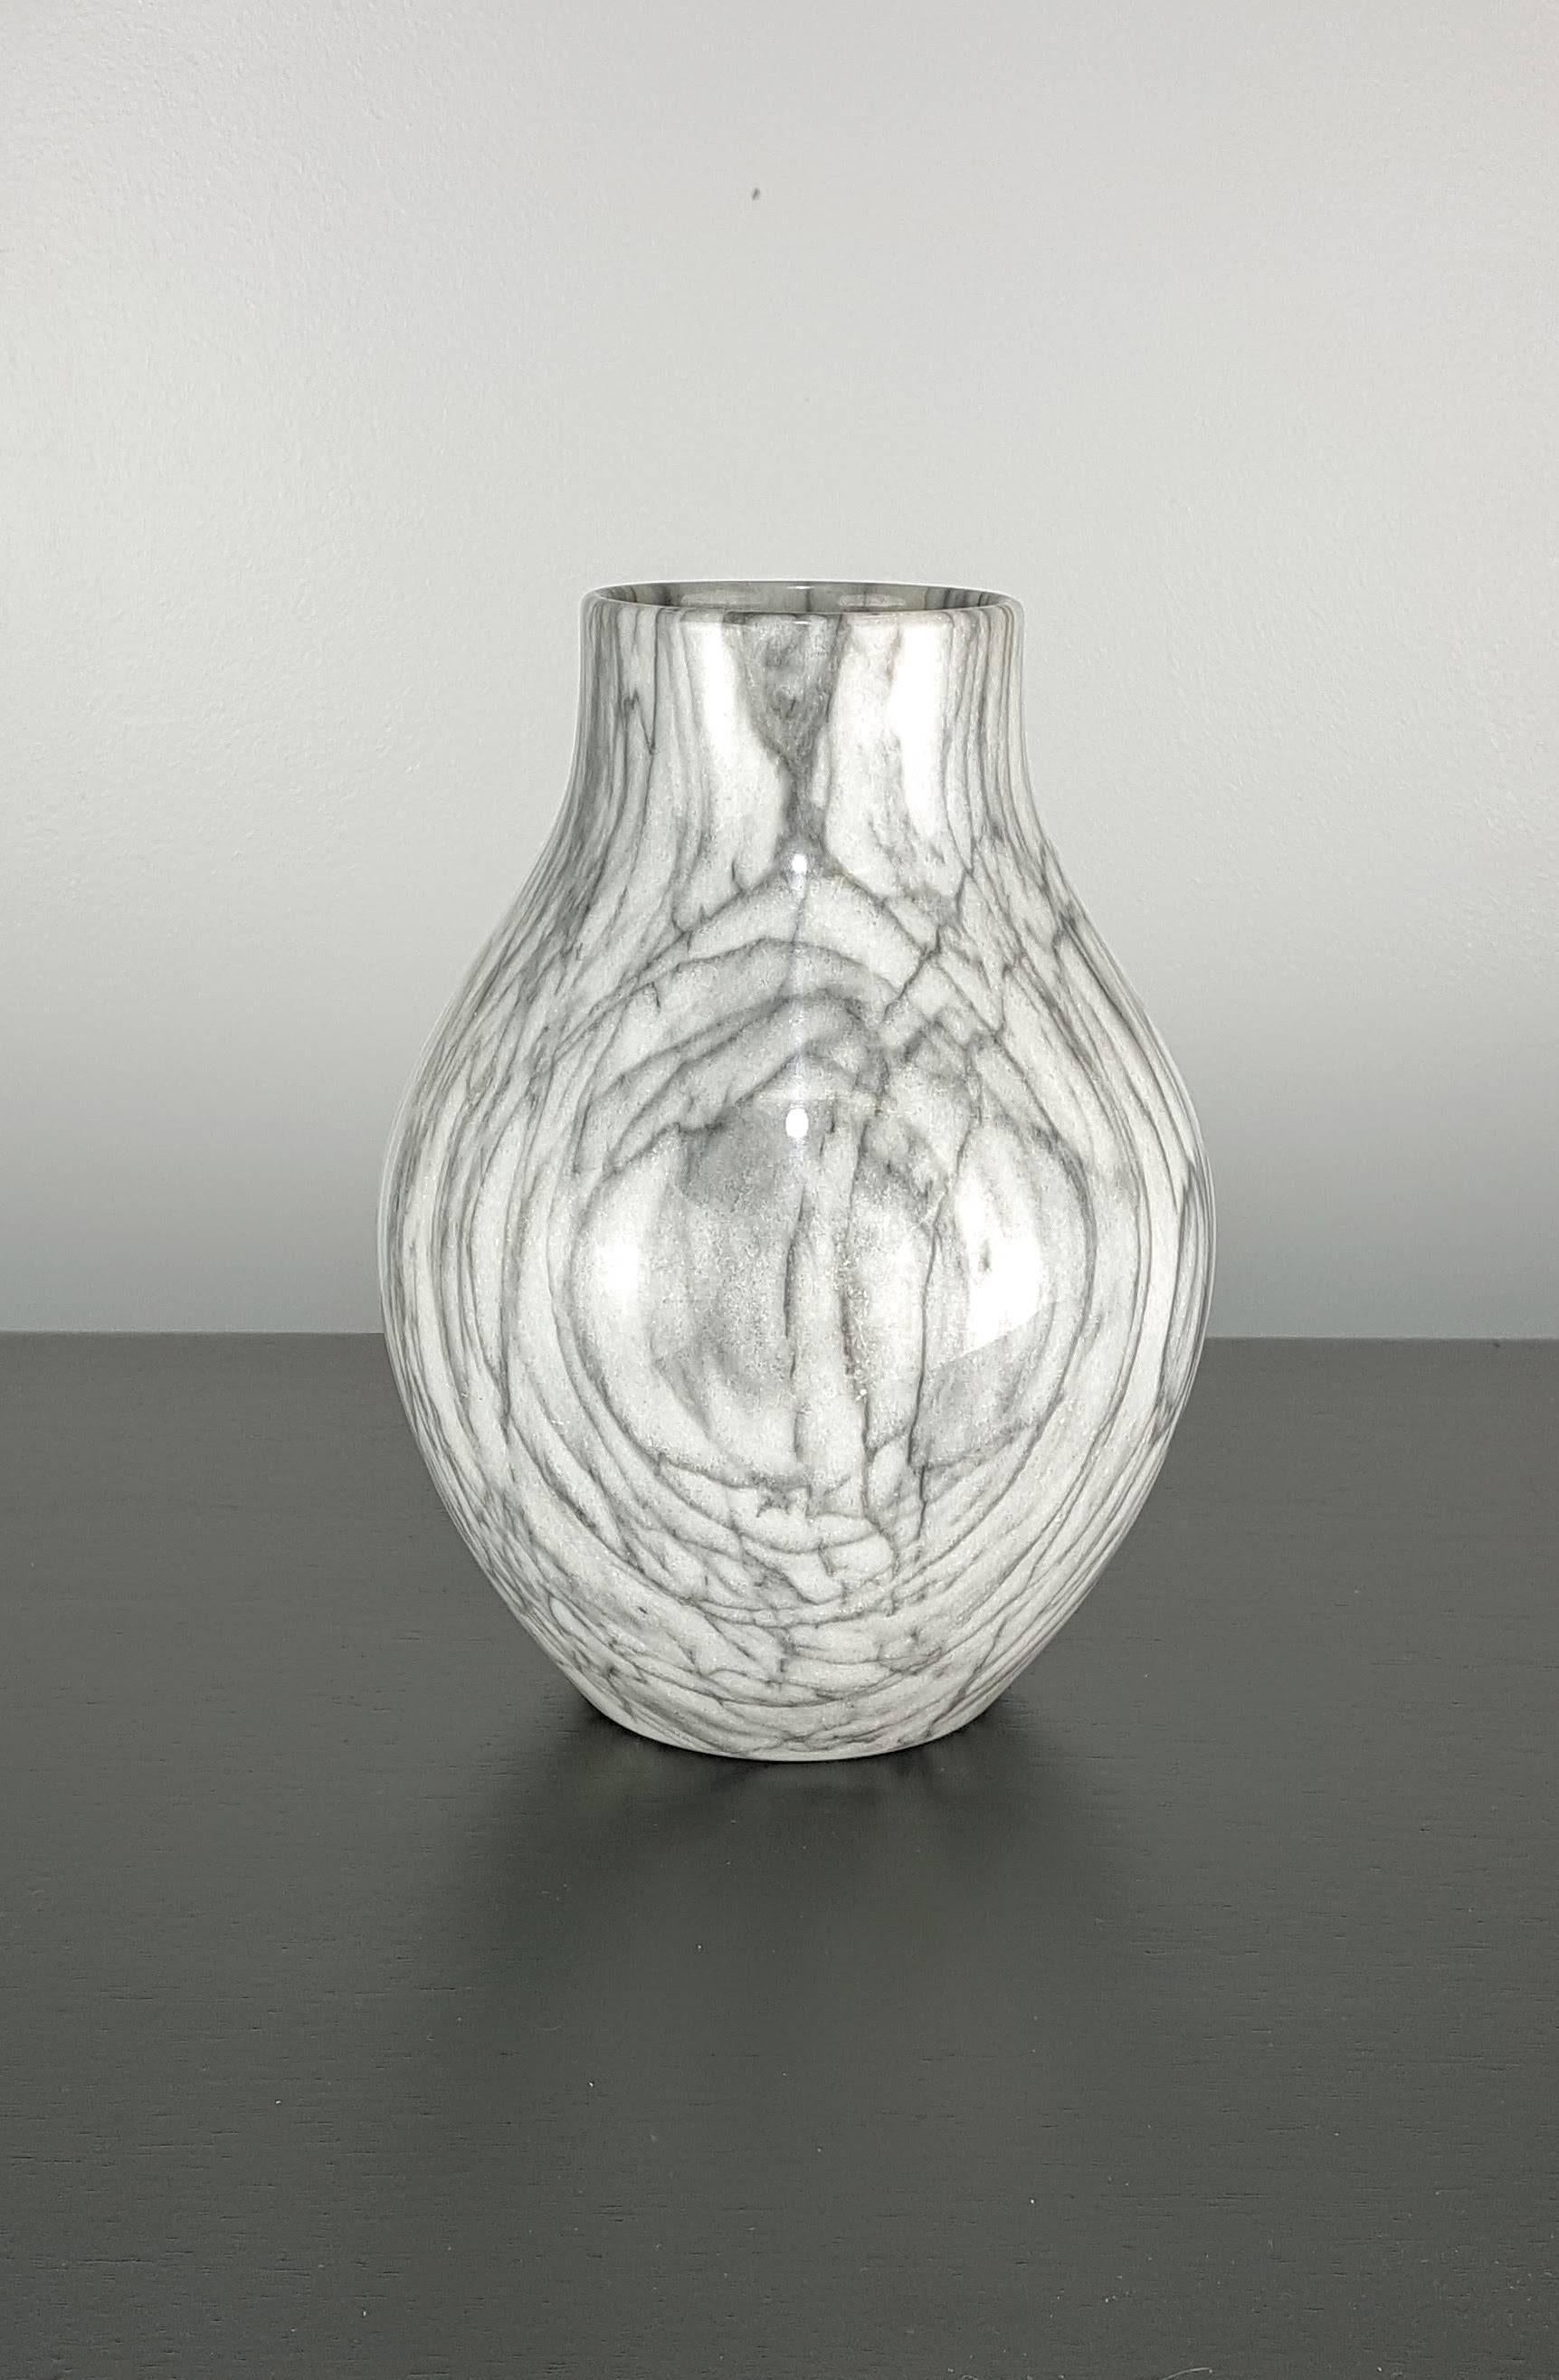 Large handmade vase in wildly grained Carrara marble, Italy 1950s. Beautifully crafted with thin walls. 

See this item in our private NYC showroom! Refine Limited is located in the heart of Chelsea at the history Starrett-LeHigh Building, 601